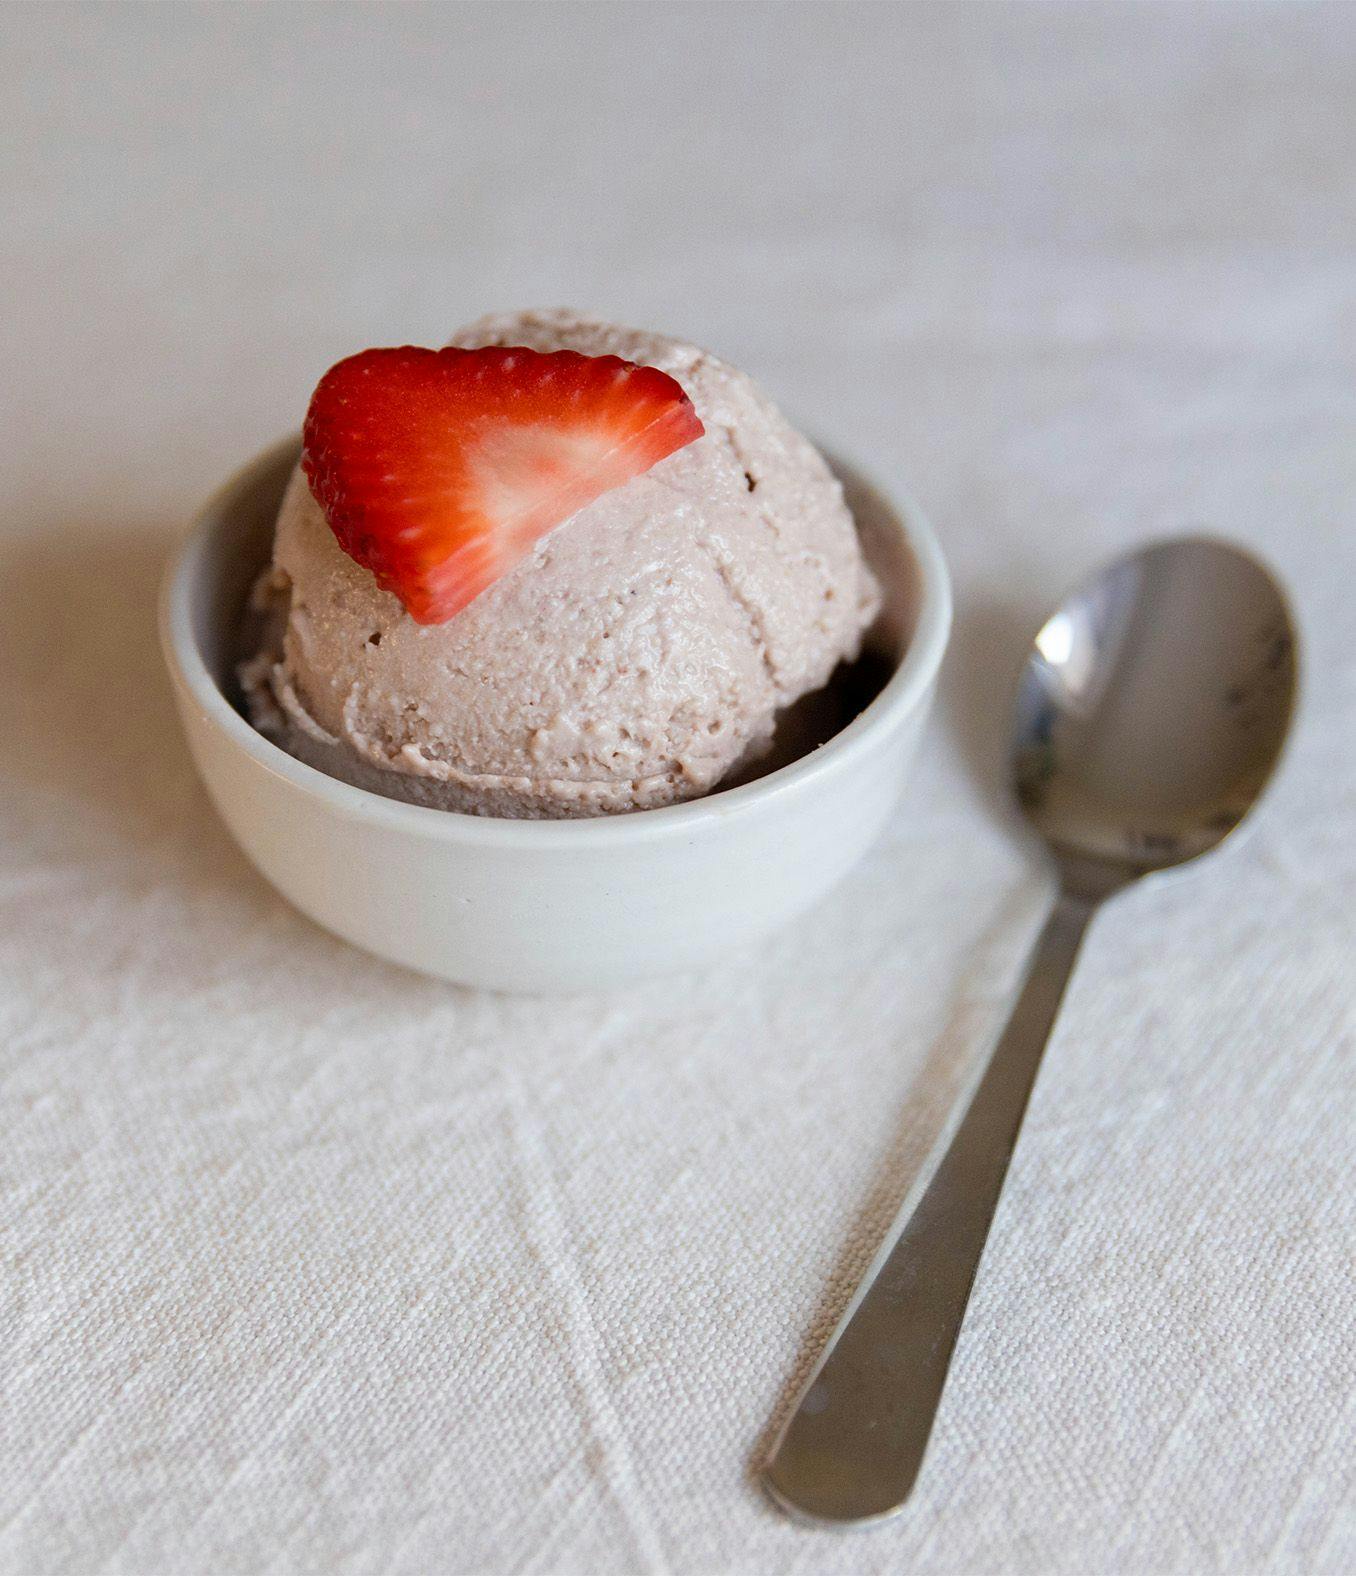 Scoop of cottage cheese ice cream in a dish with a fresh strawberry and spoon.